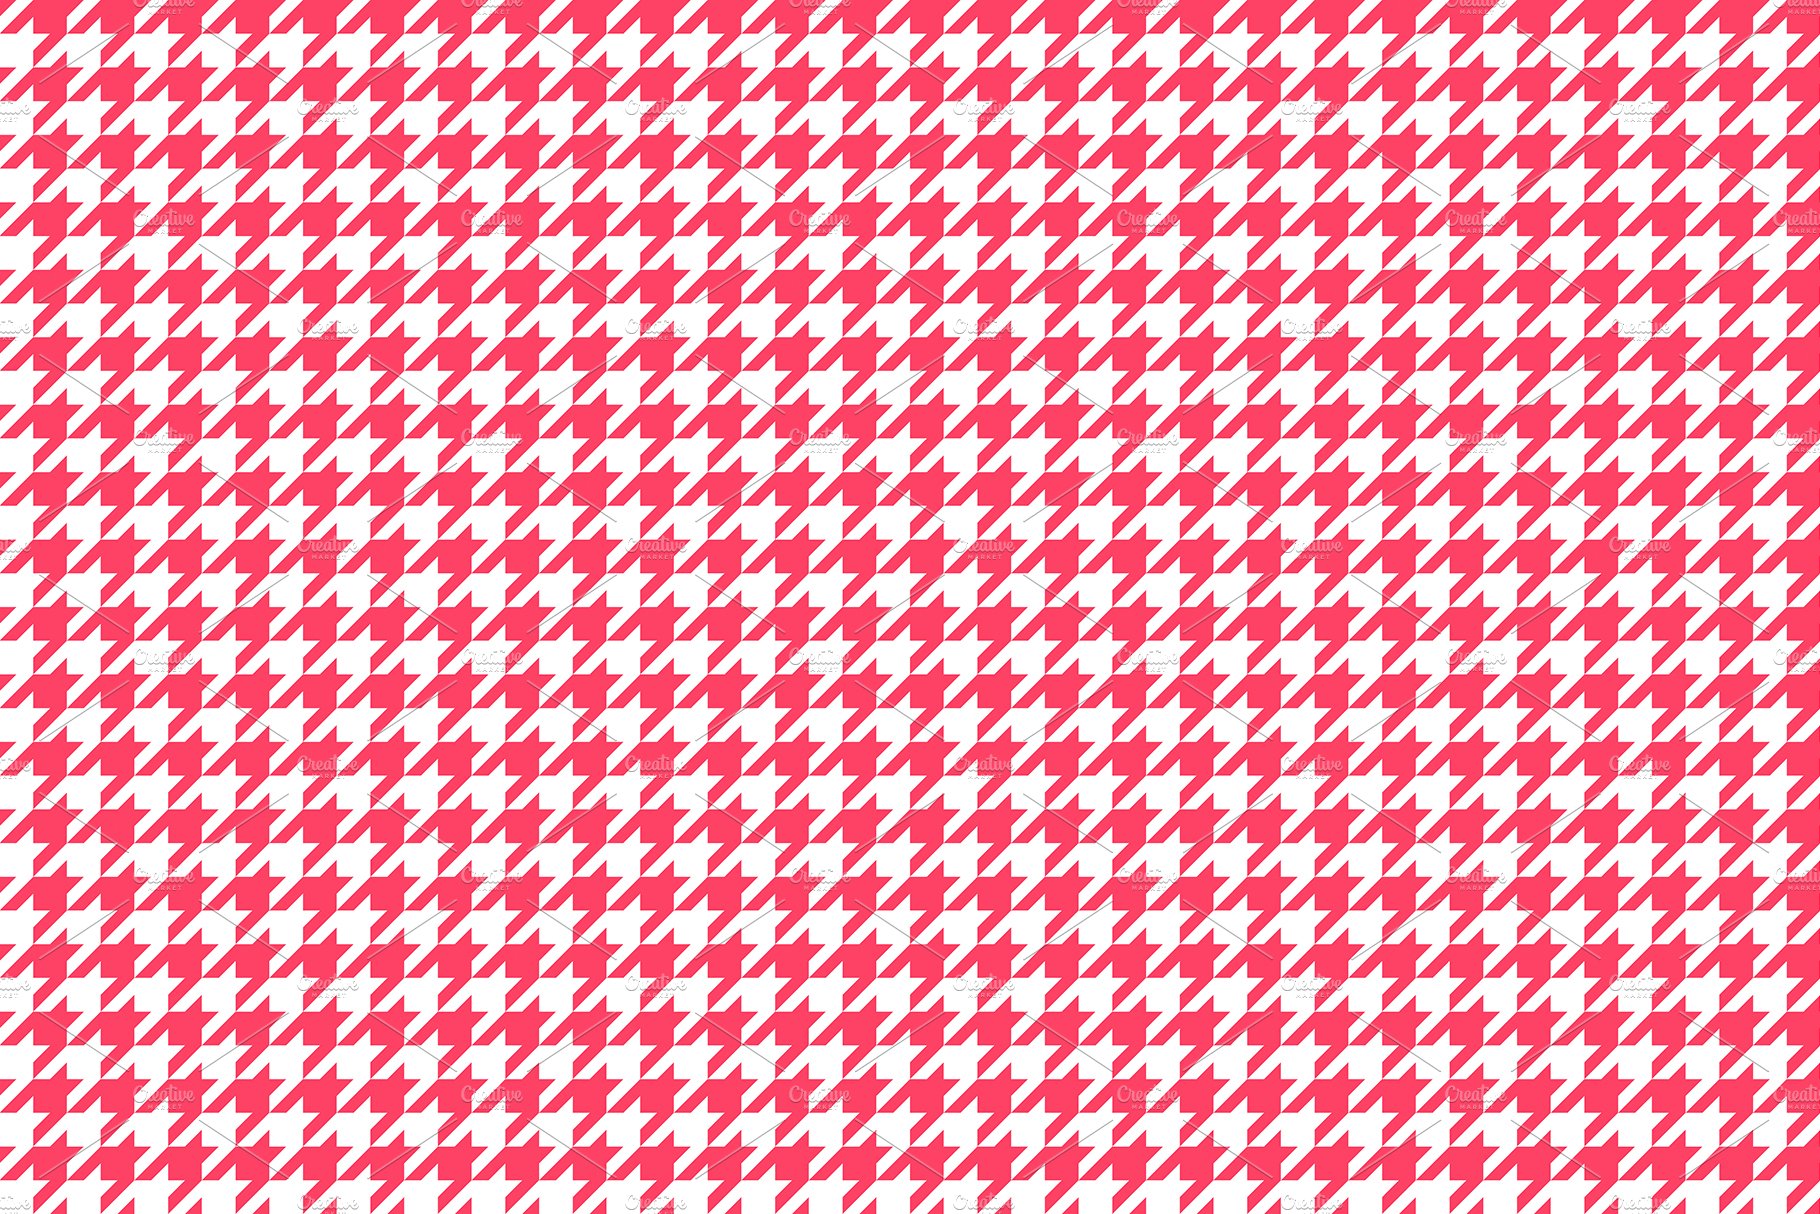 16 houndstooth pattern background texture copy 641